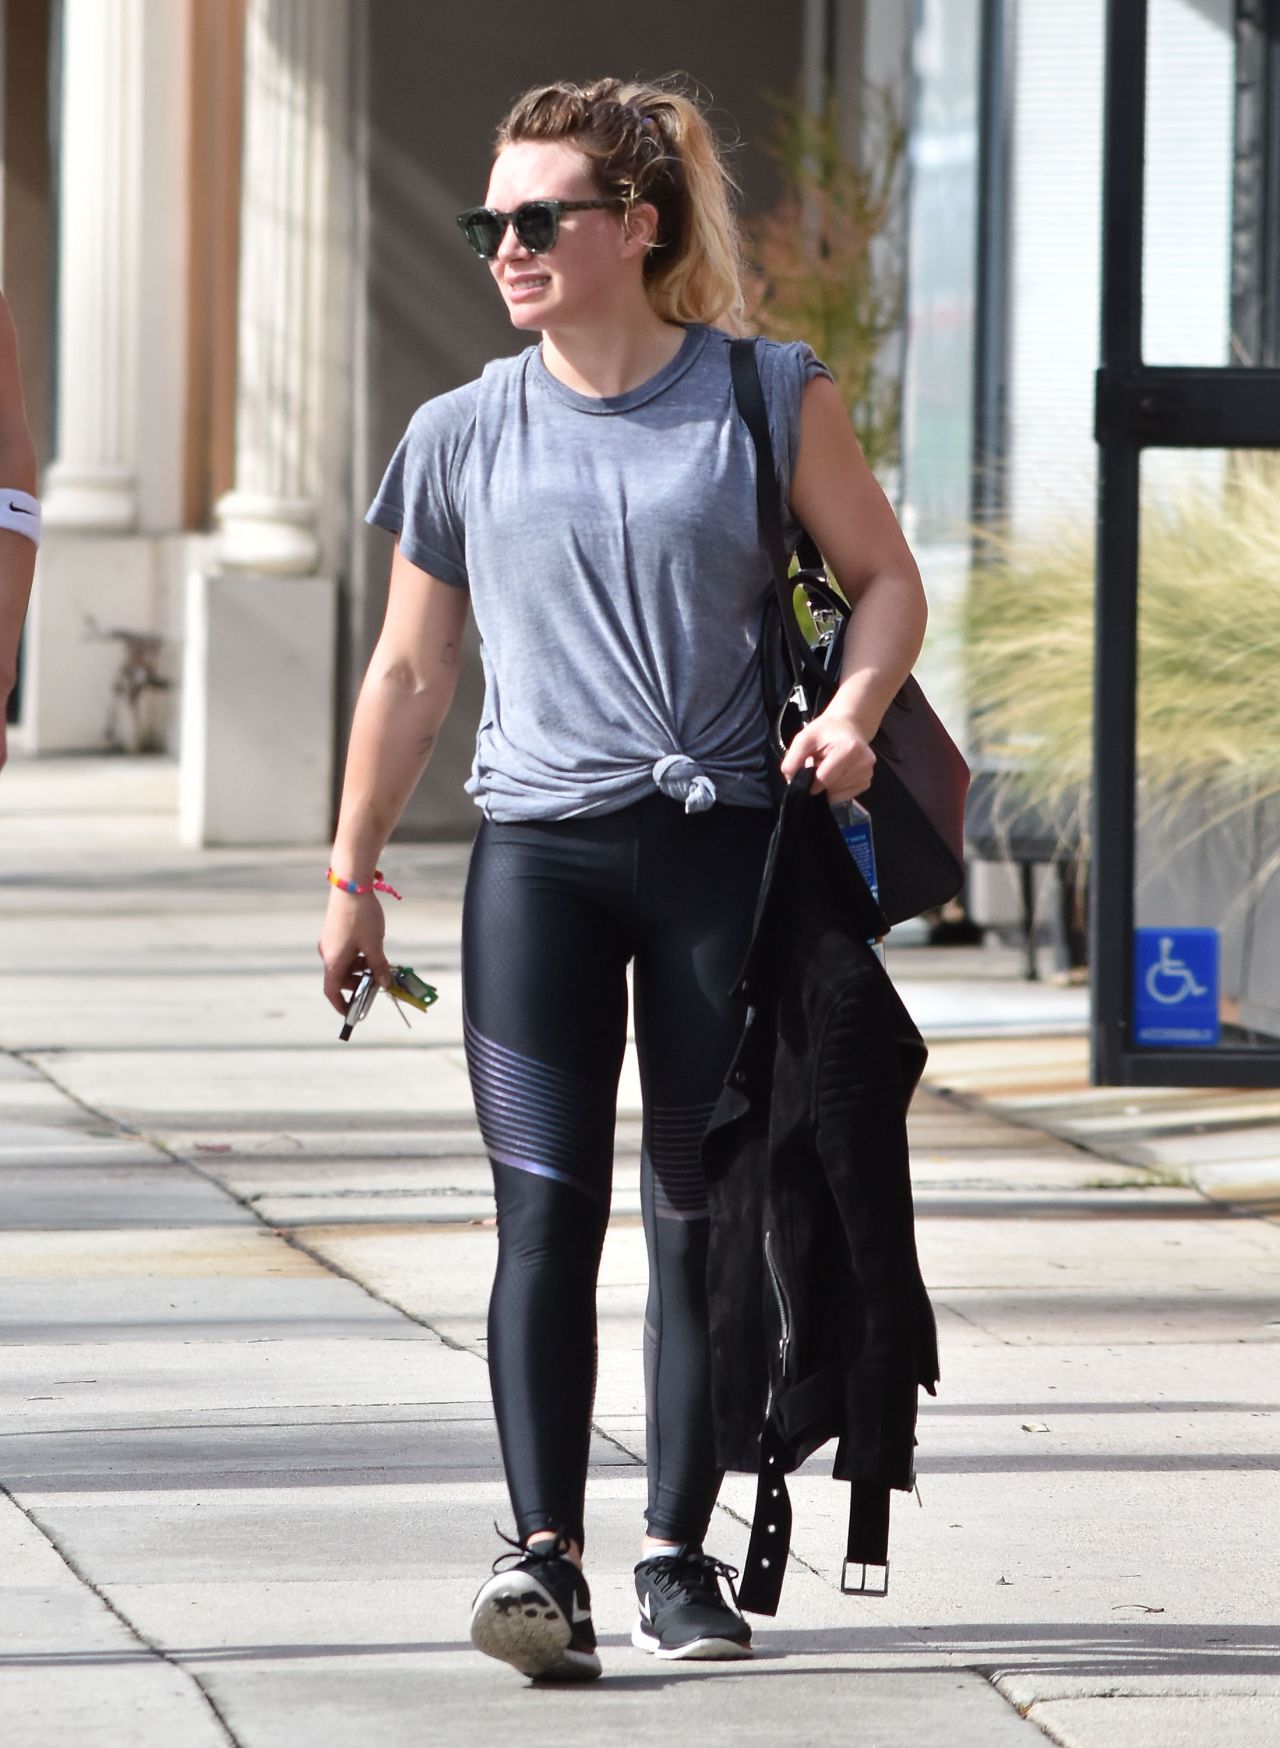 Hilary Duff at the Gym in Studio City 2/7/ 2017